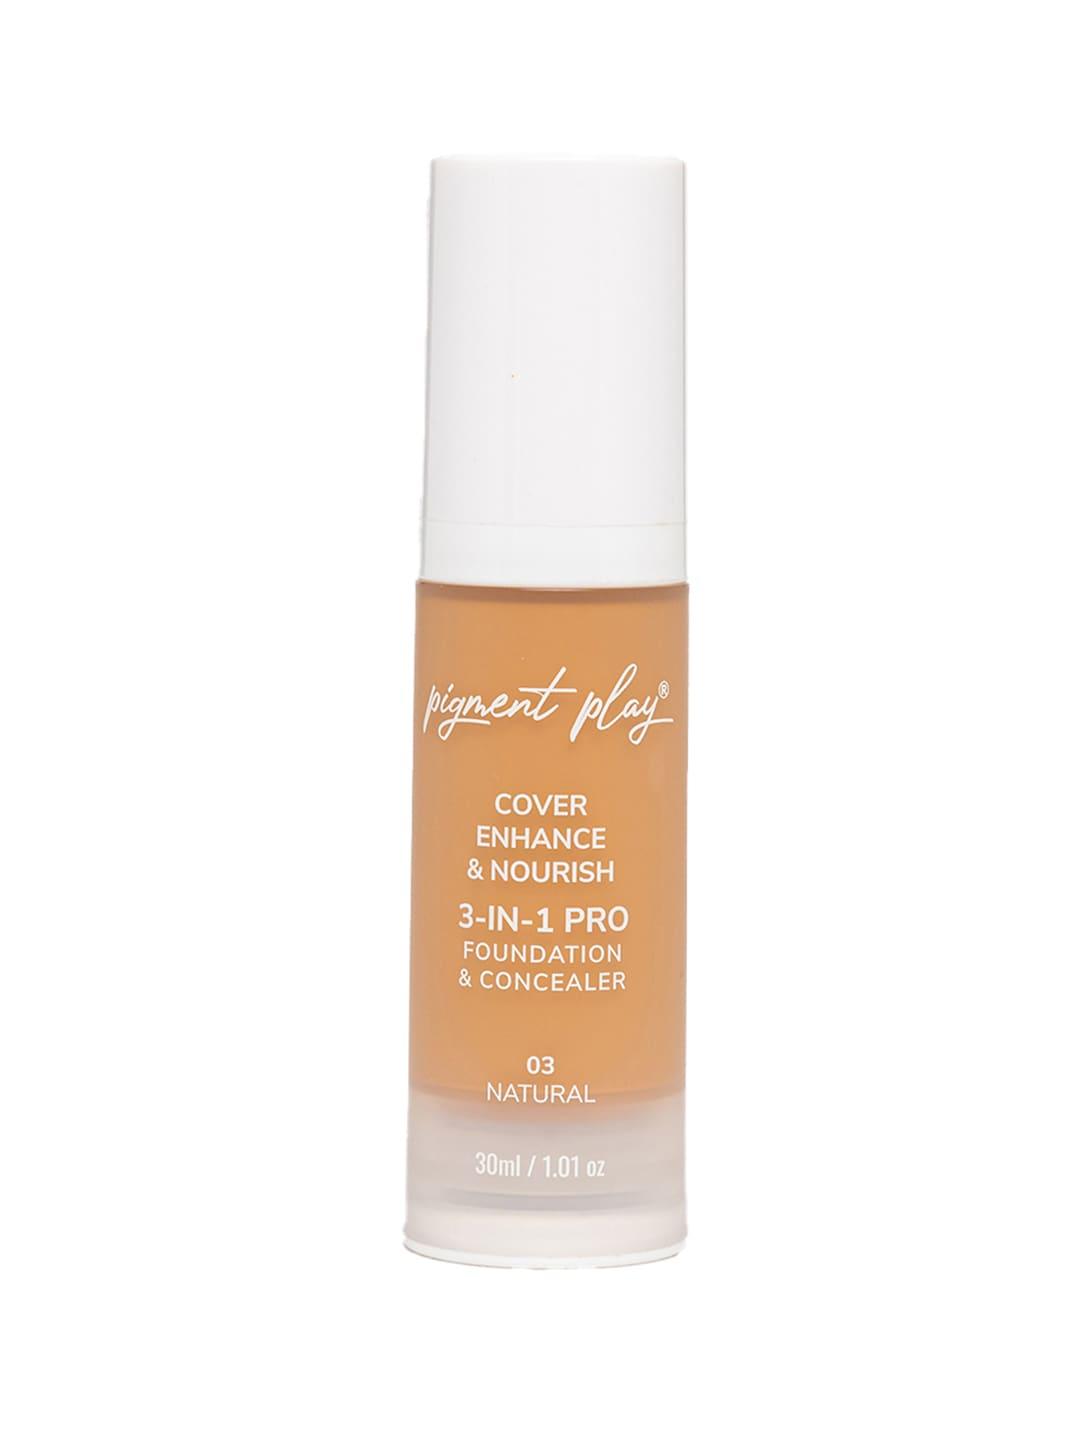 pigment play cover enhance & nourish 3-in-1 pro foundation & concealer 30ml - natural 03